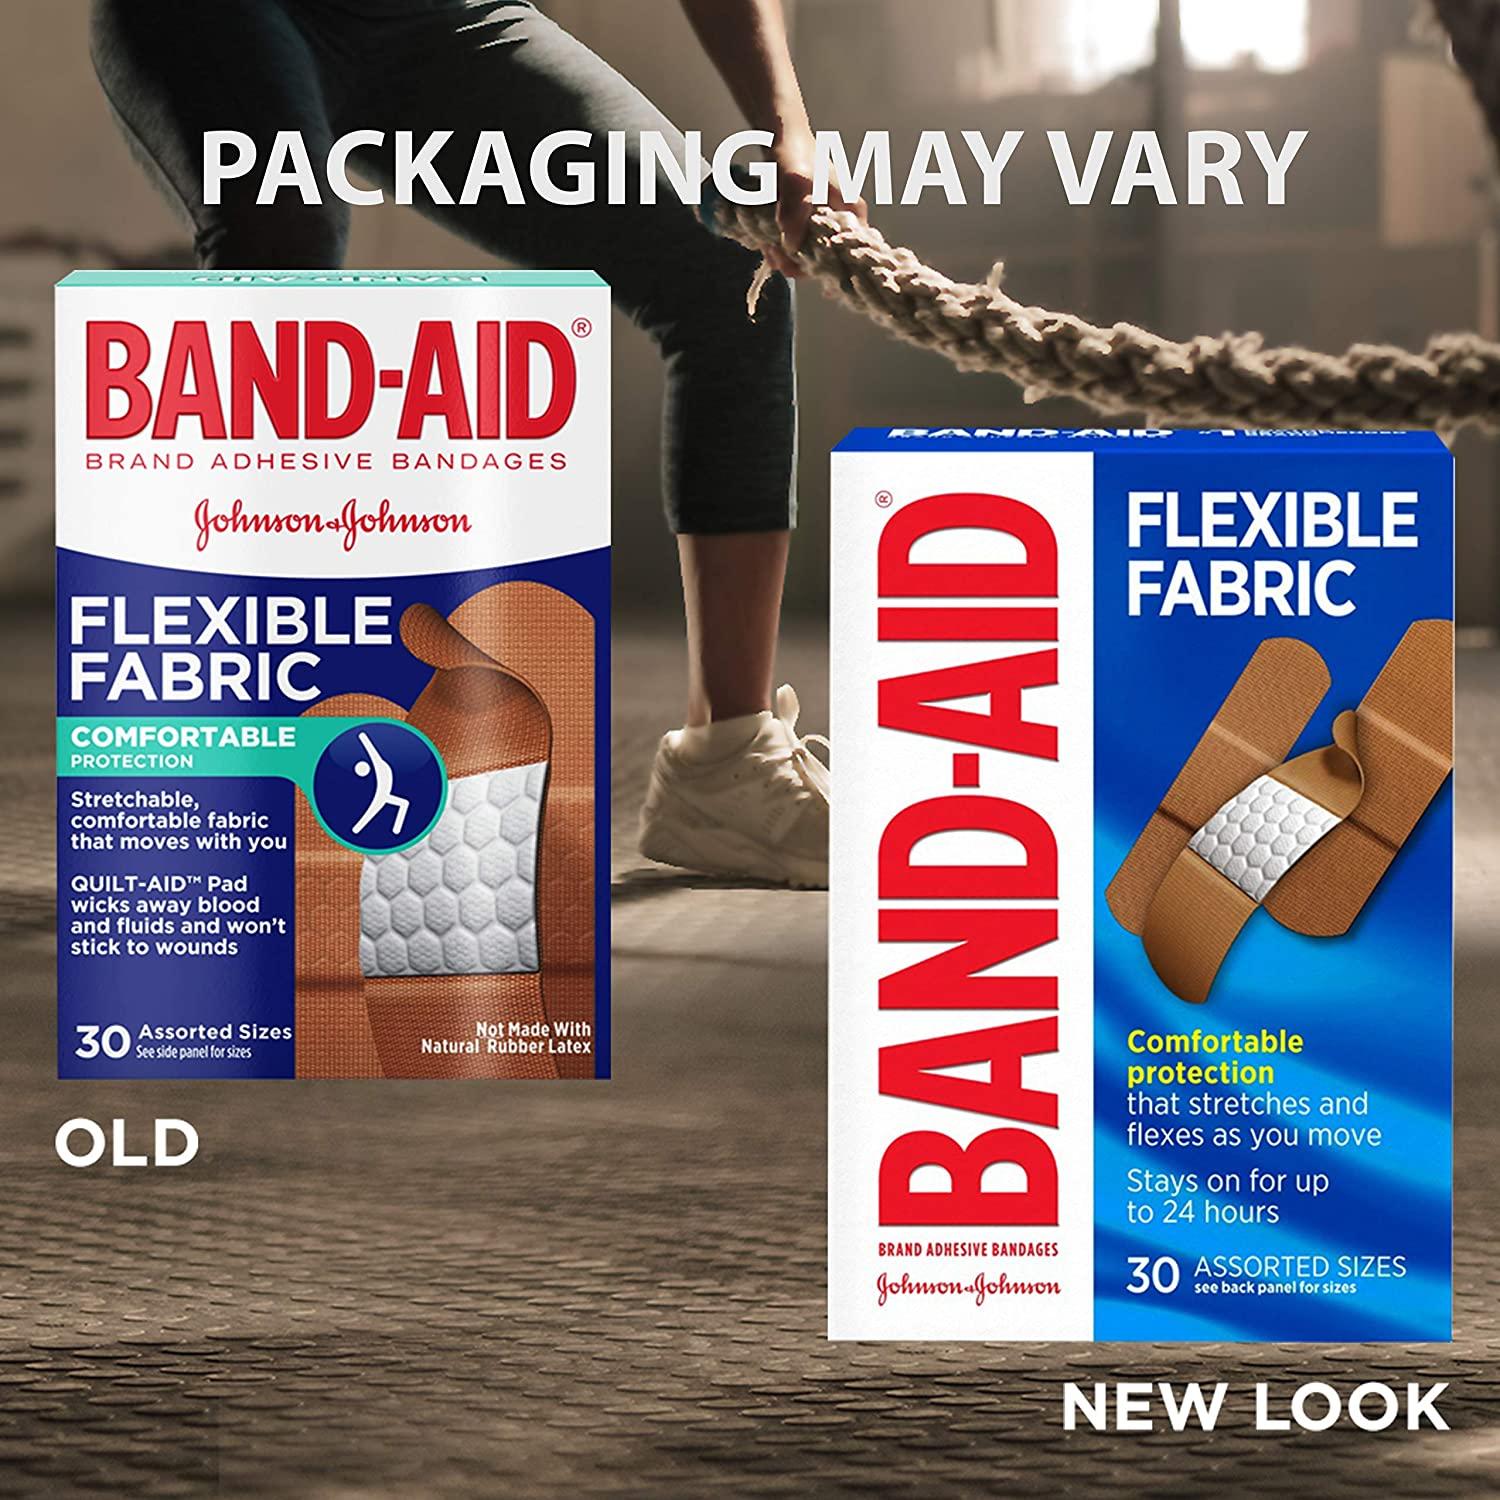 Band-Aid Brand Flexible Fabric Adhesive Bandages for Comfortable Flexible  Protection & Wound Care of Minor Cuts & Scrapes, with Quilt-Aid Technology  to Cushion Painful Wounds, Assorted Sizes, 30 ct